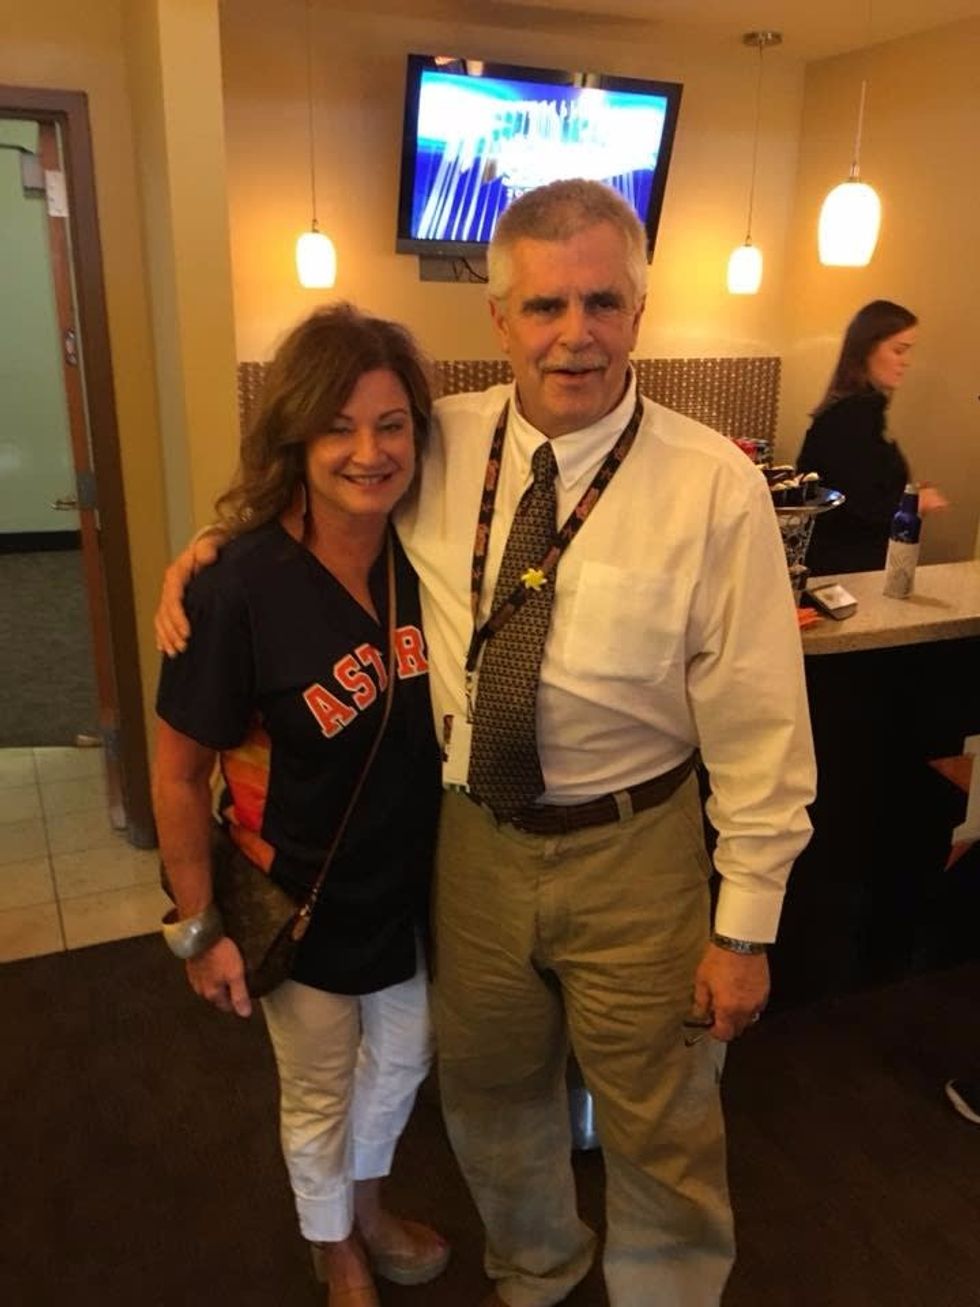 Longtime Astros PA announcer Bob Ford's booming voice inspires fans, players